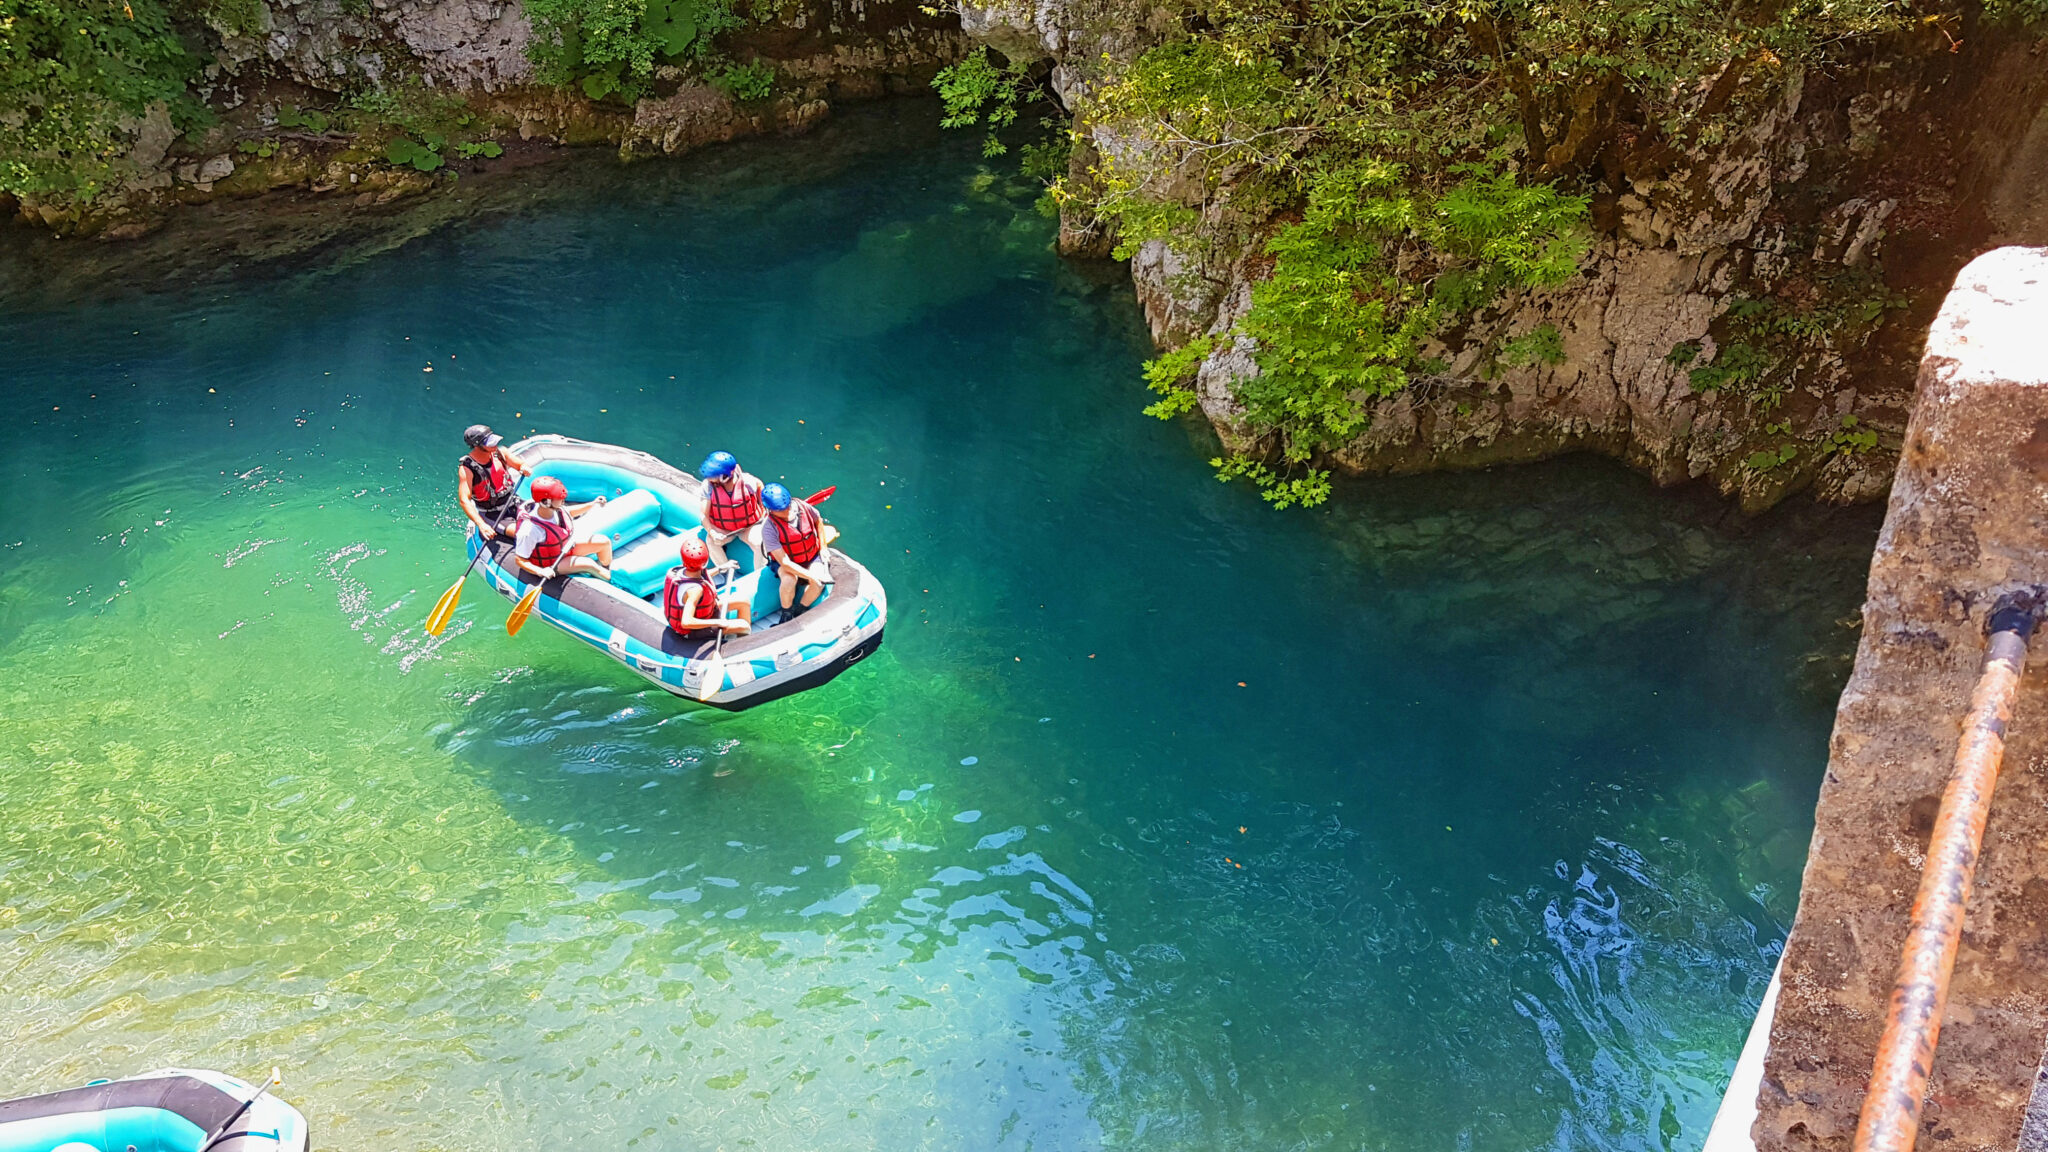 Voidomatis River, ideal for rafting fans / Shutterstock